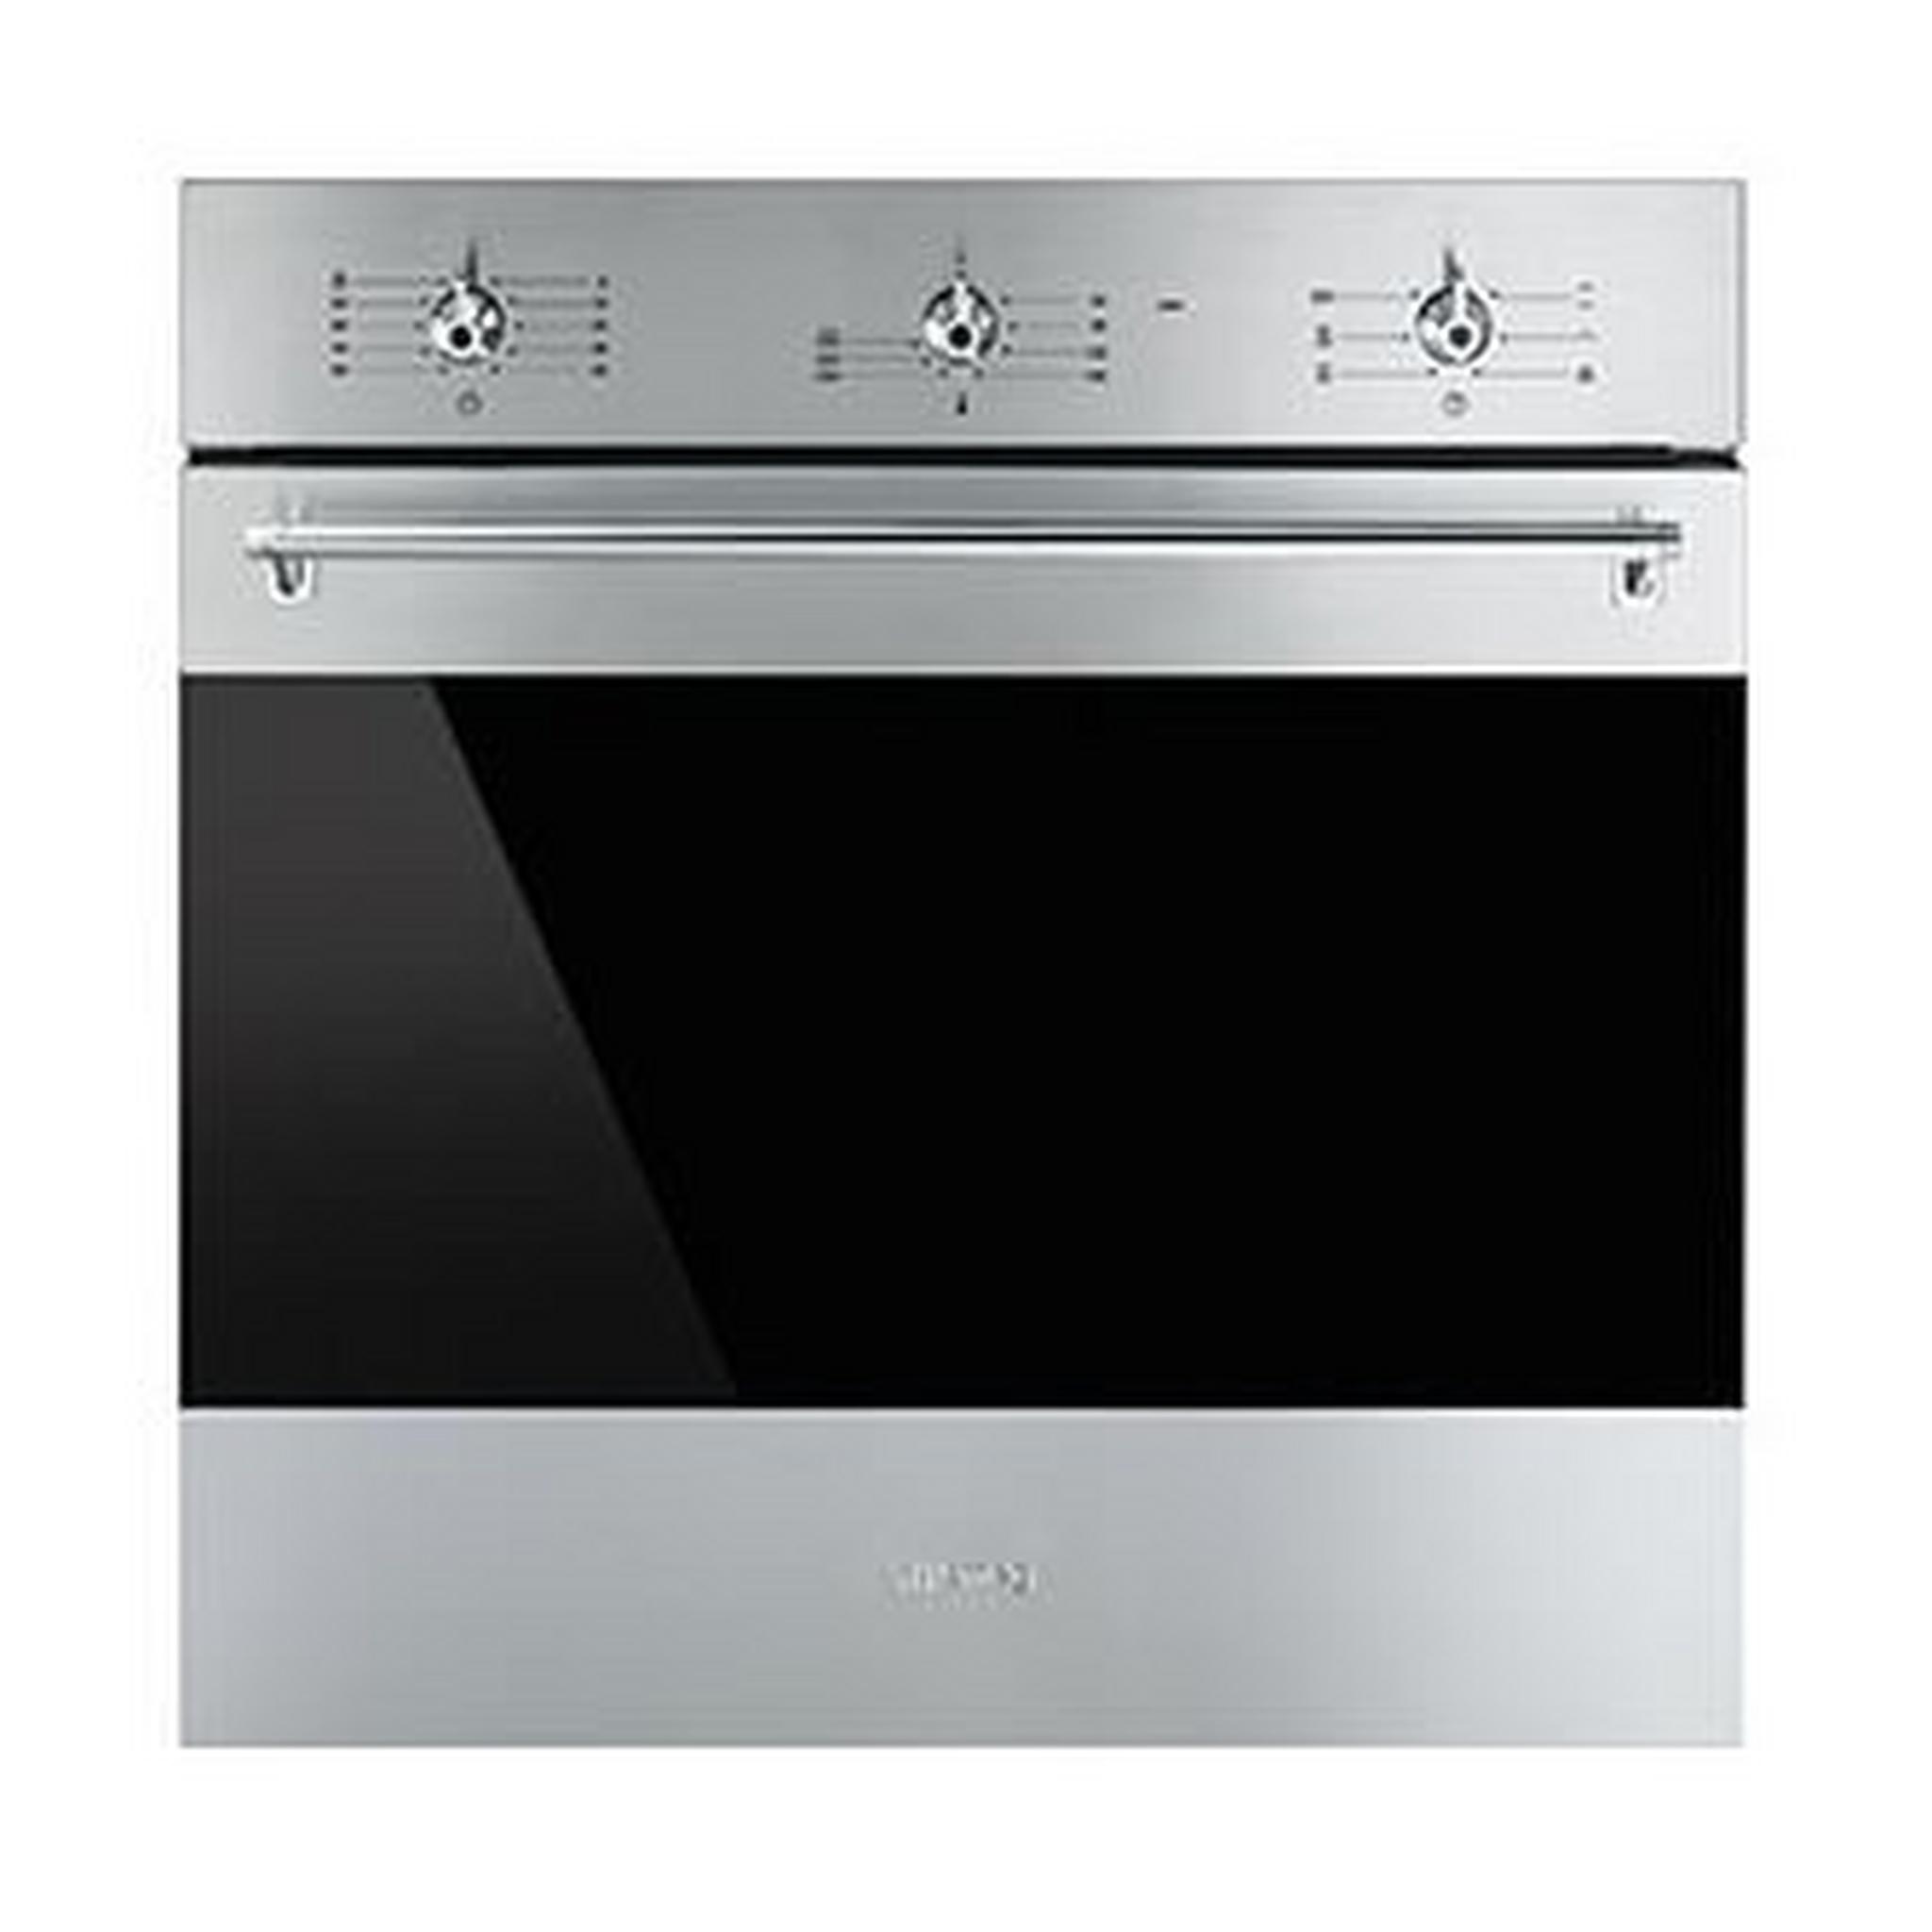 Smeg 60cm 70L Built-In Electric Oven (SF6381X) - Stainless steel